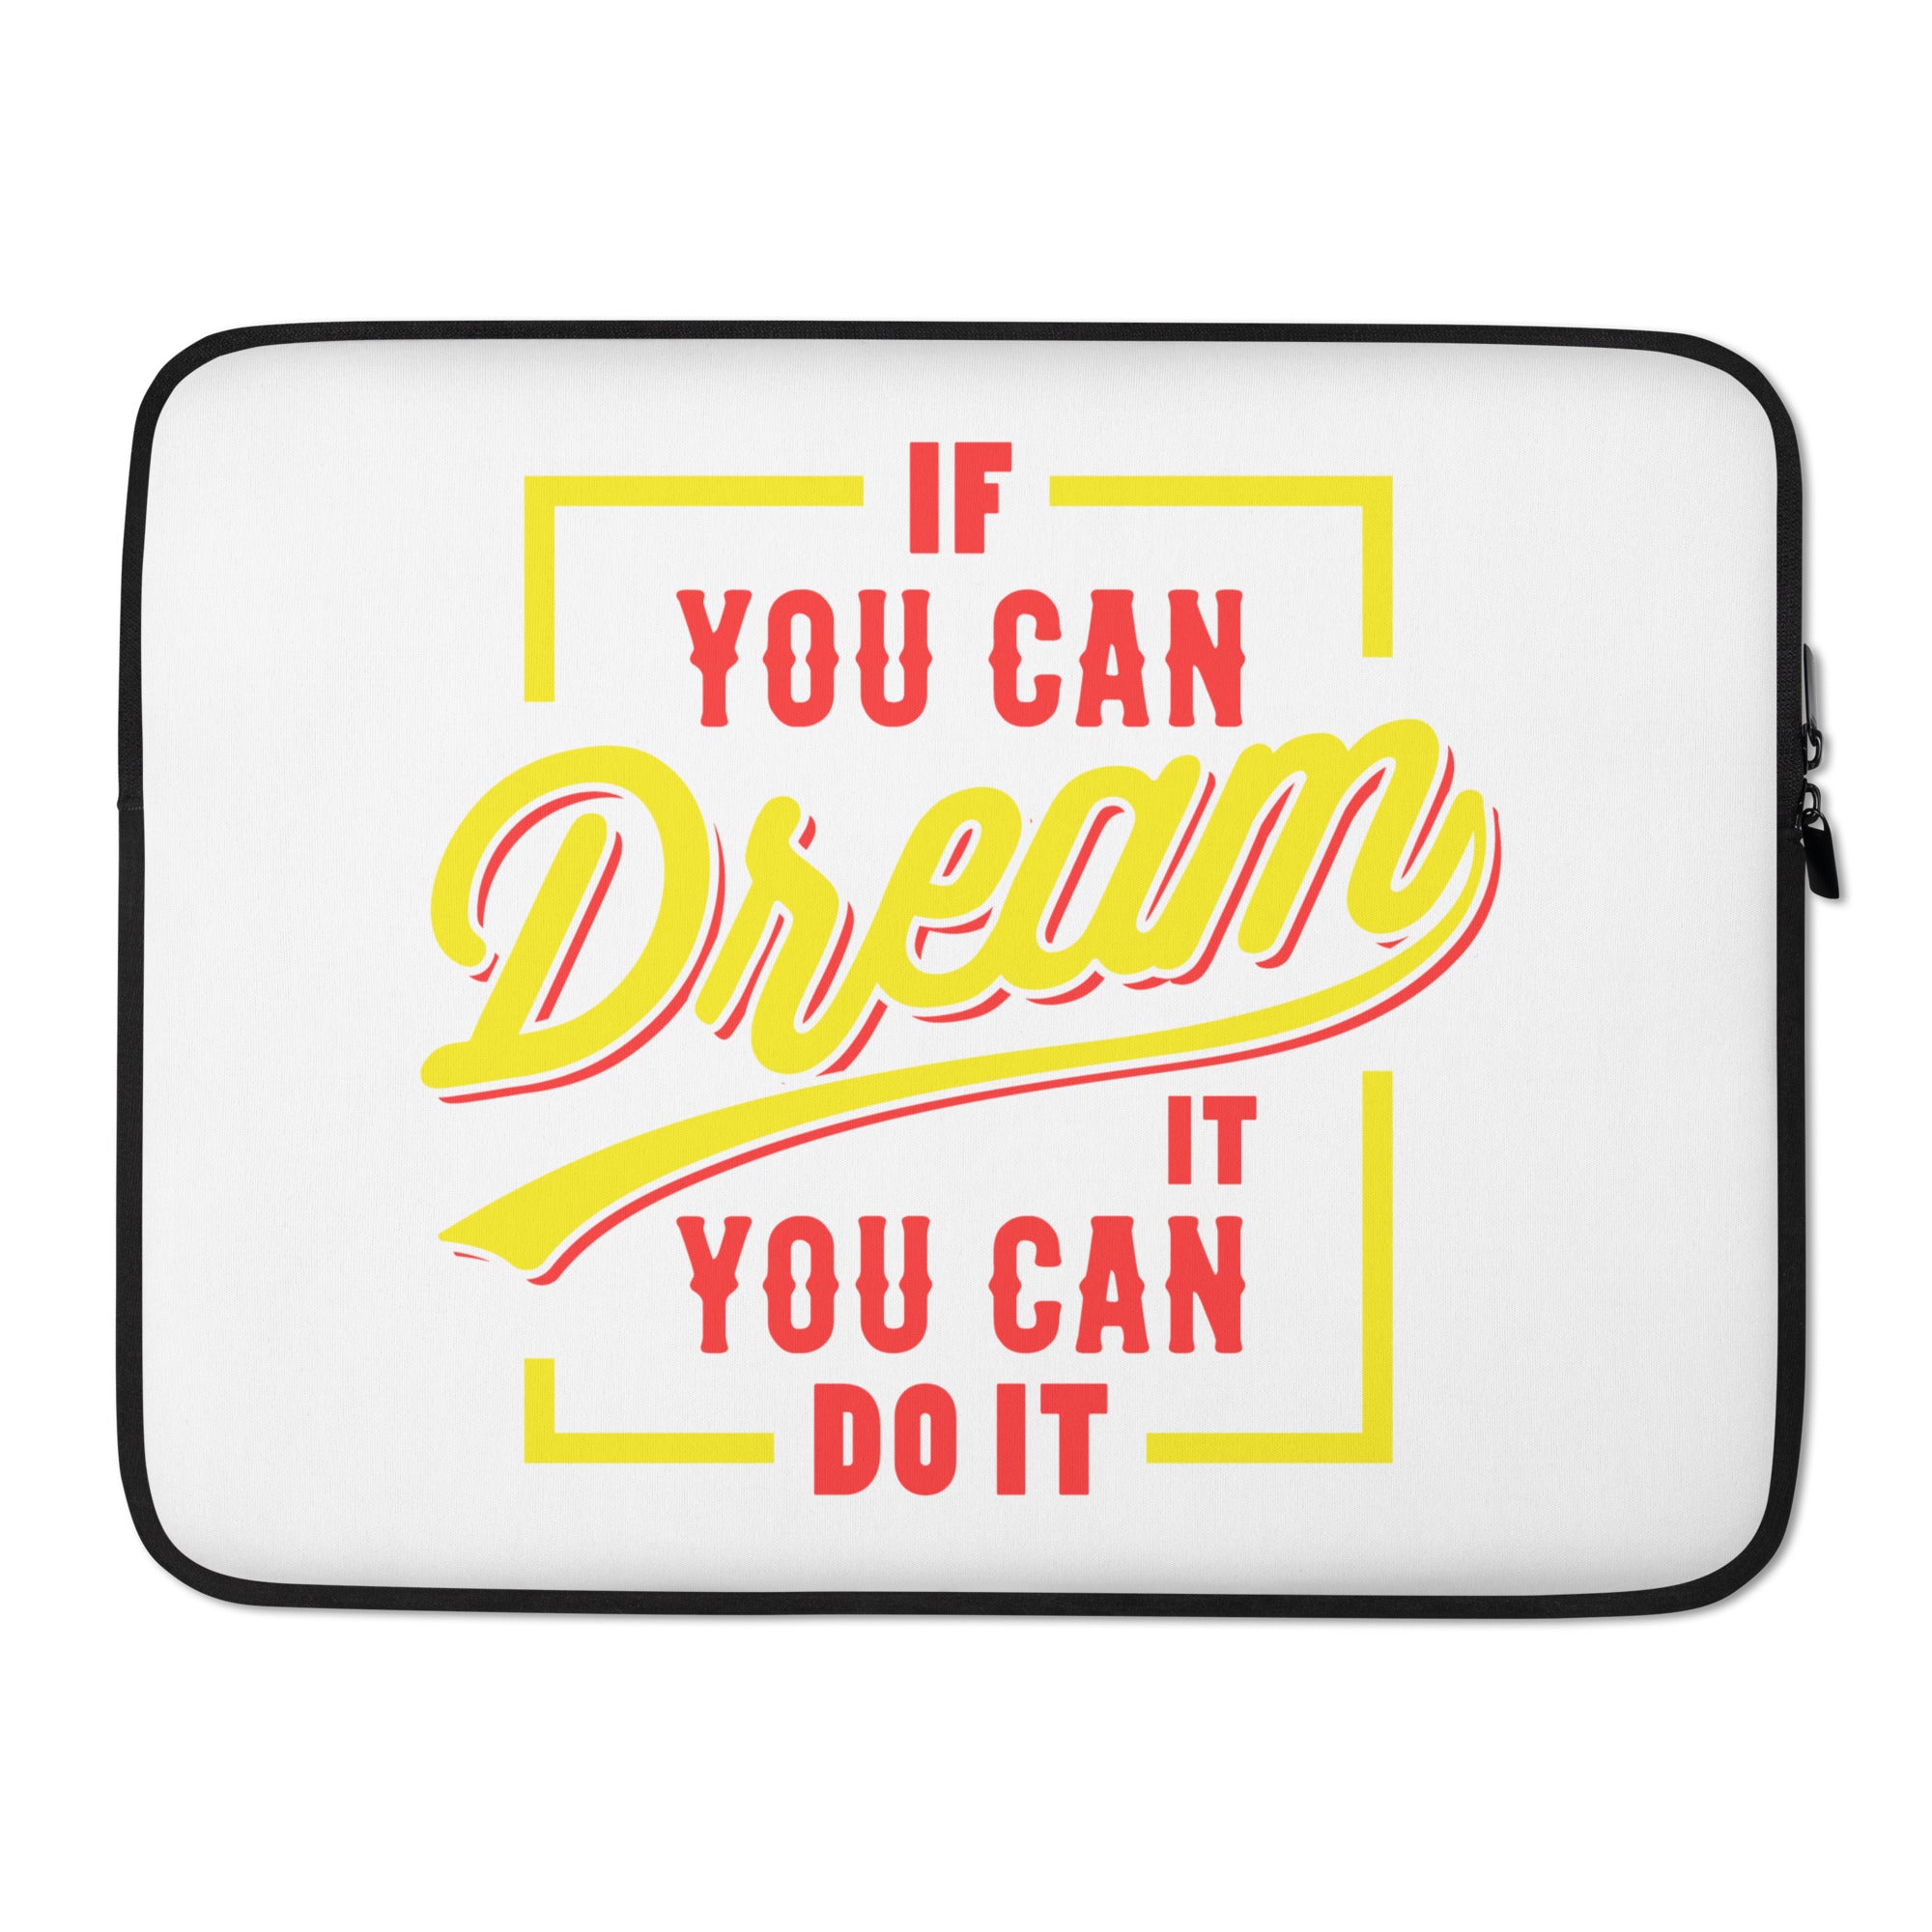 If You Can Dream It, You Can Do It - Laptop Sleeve